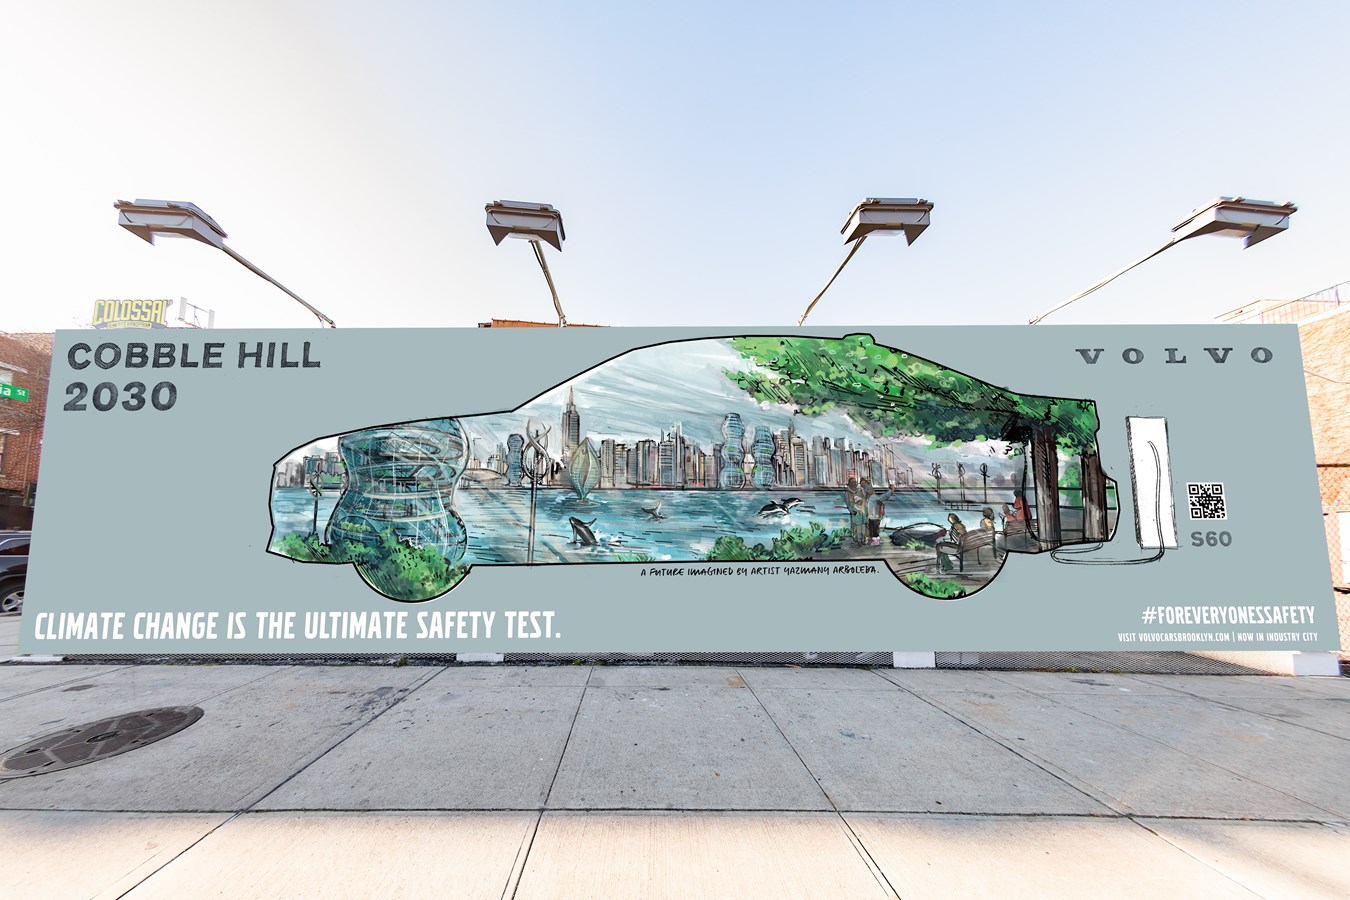 Volvo Car USA partners with Brooklyn artist Yazmany Arboleda to create a vision for a sustainable future in the borough - Cobble Hill Mural